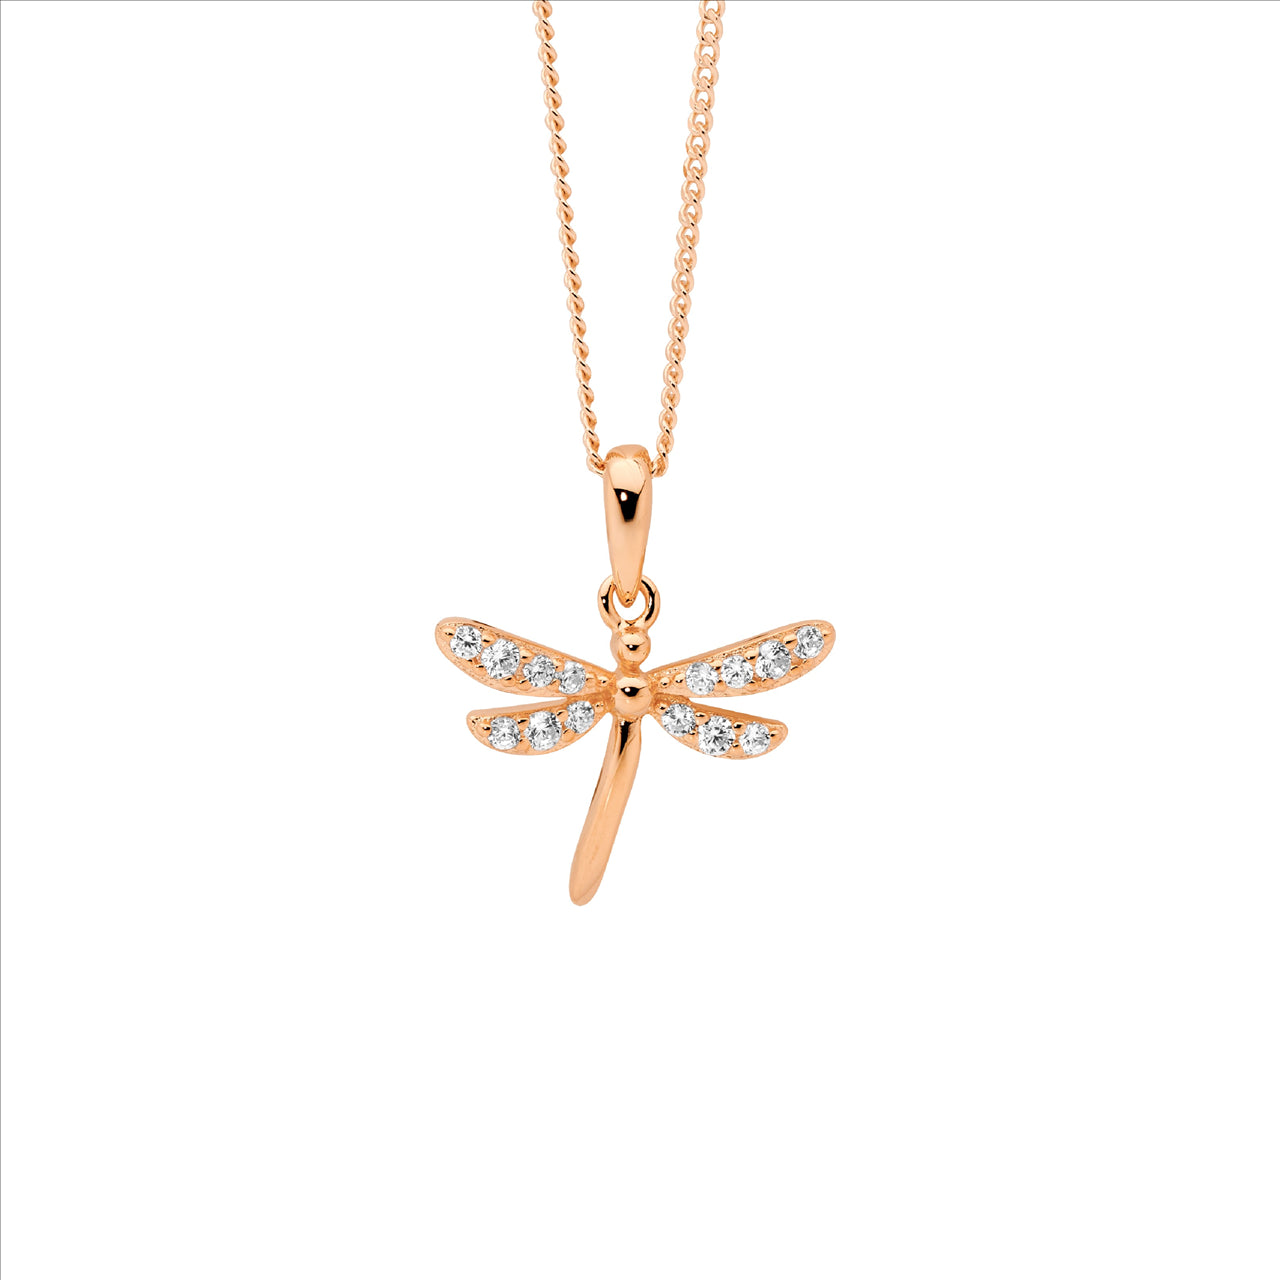 Dragonfly Necklace set with Cubic Zirconias - Rose Gold.